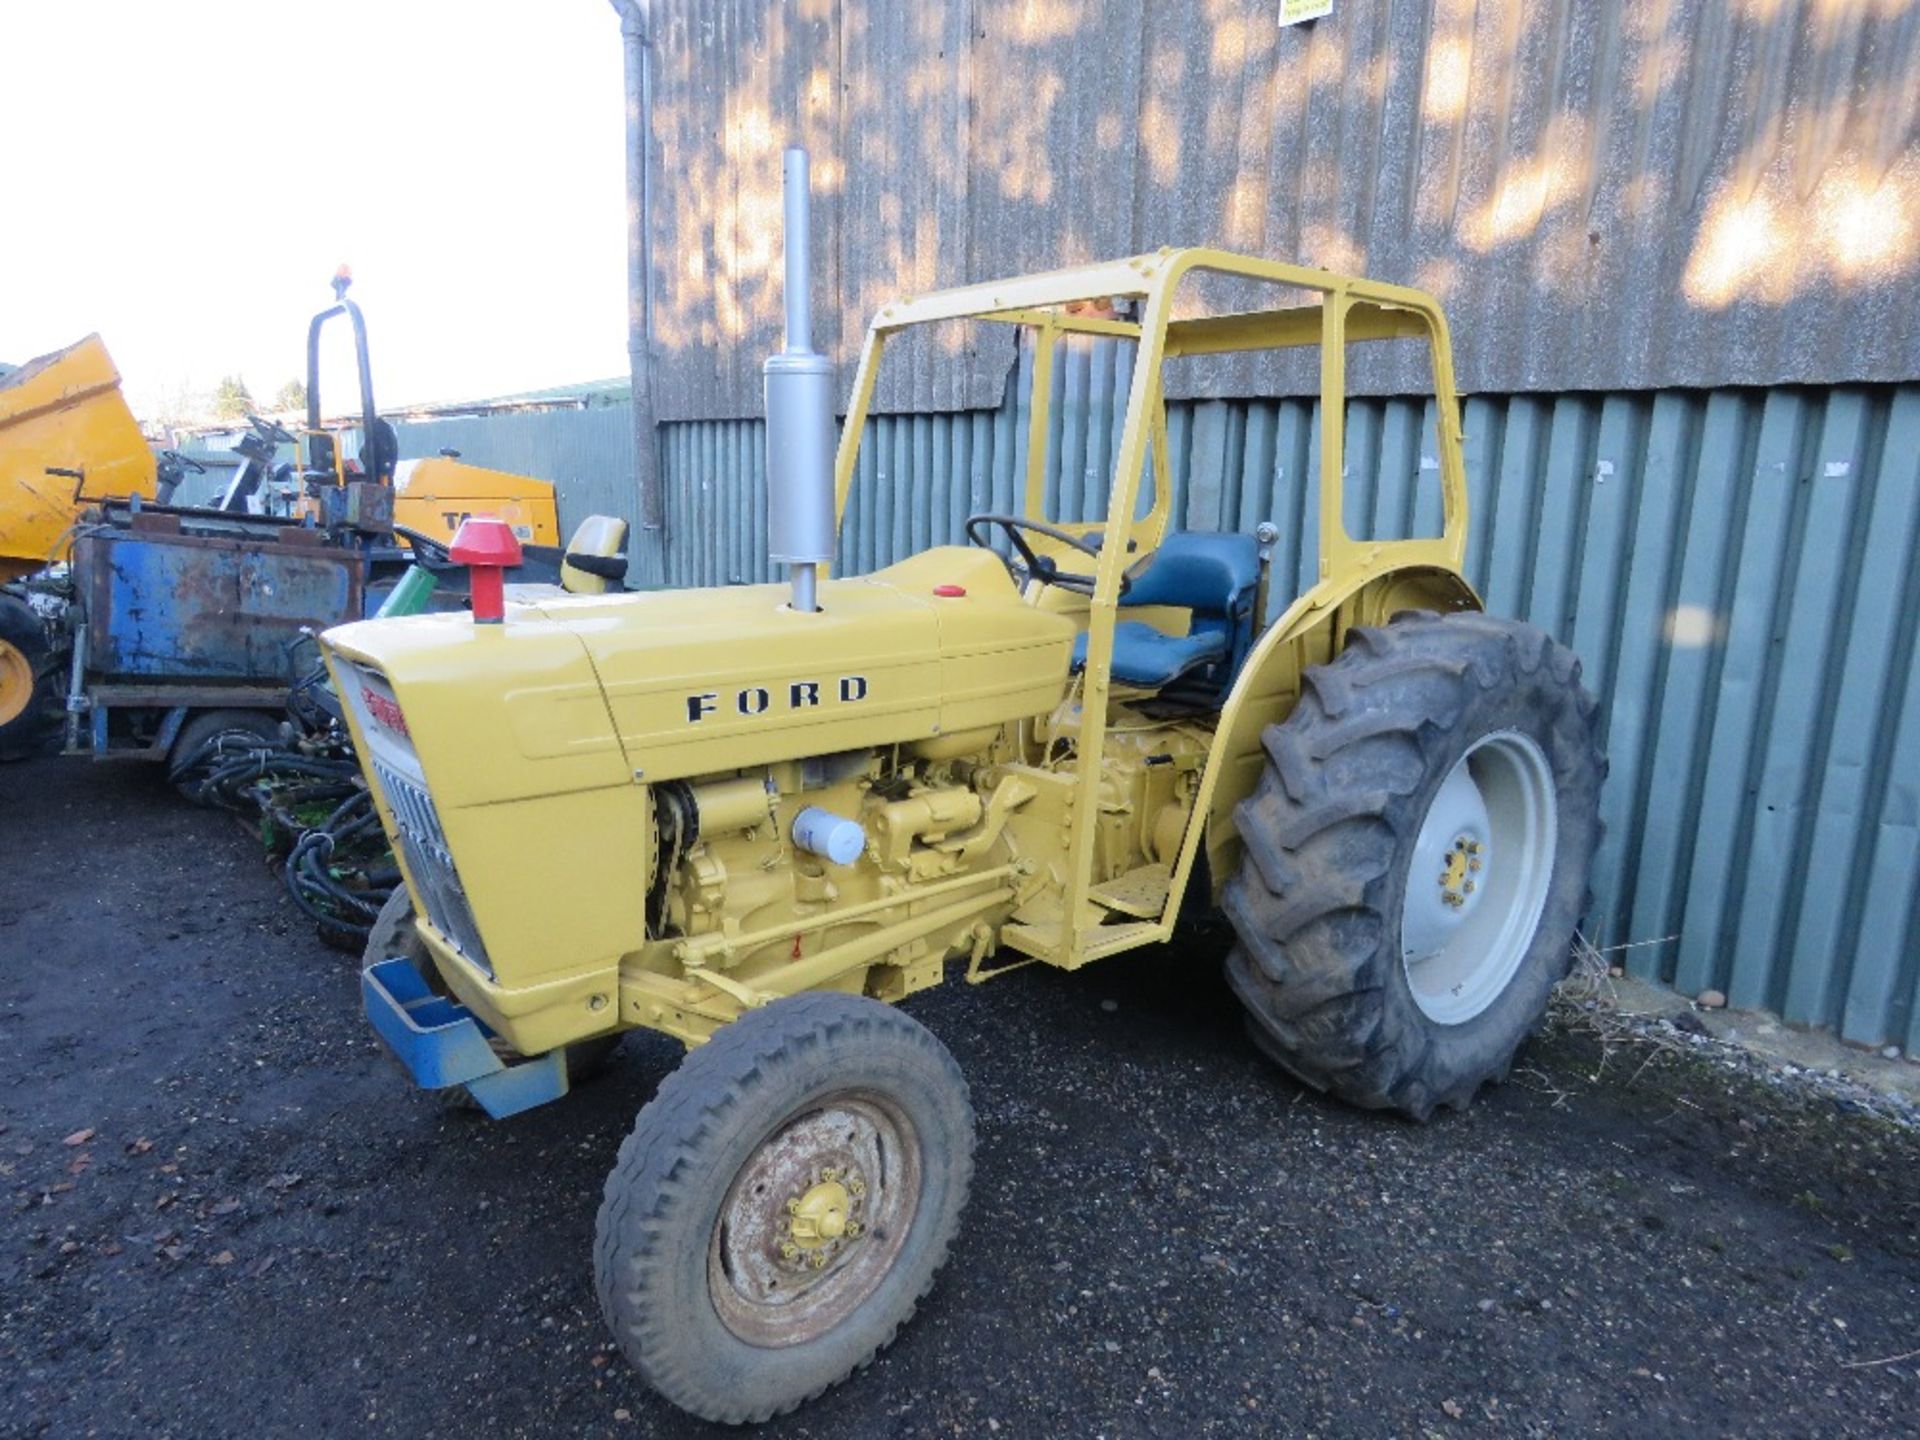 FORD INDUSTRIAL SPEC AGRICULTURAL TRACTOR, LIKE A 3000. UNFINISHED PROJECT. WHNE TESTED WAS SEEN TO - Image 2 of 8